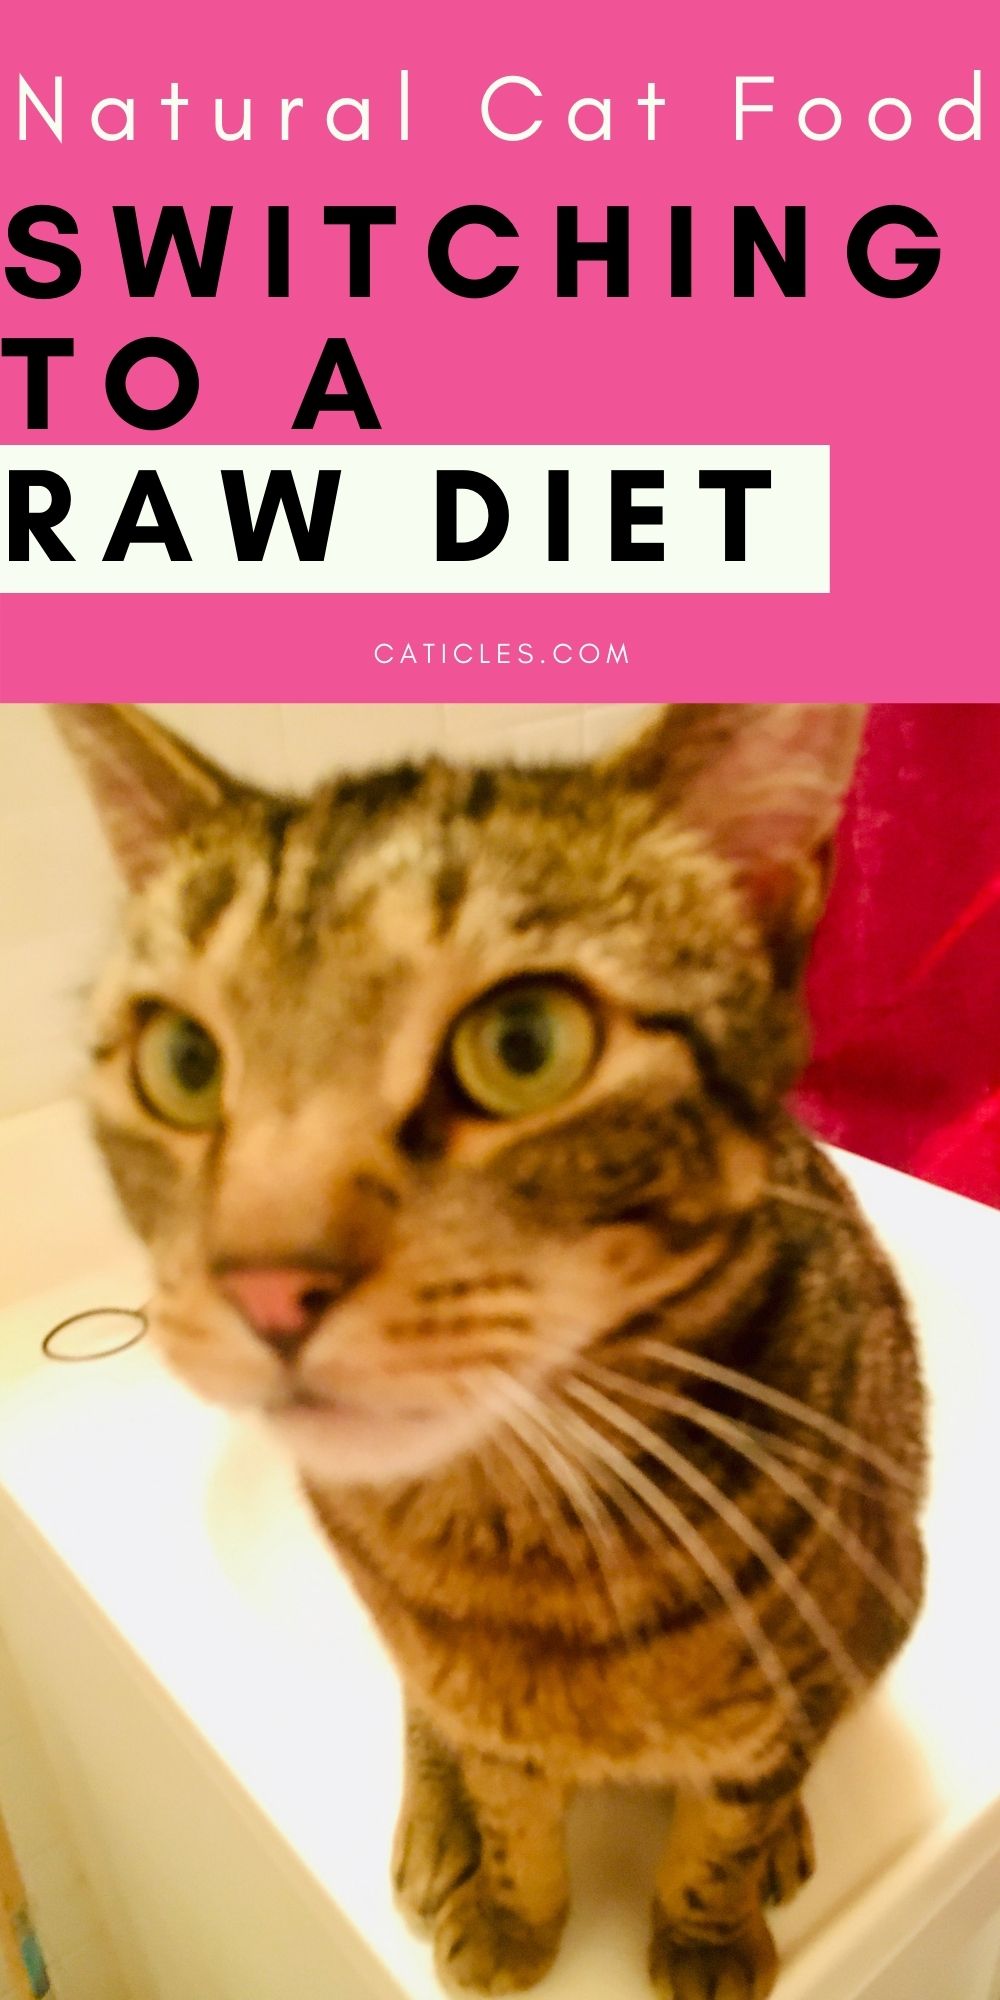 How Do You Feed a Cat a Raw Diet Safely? What's the Best?